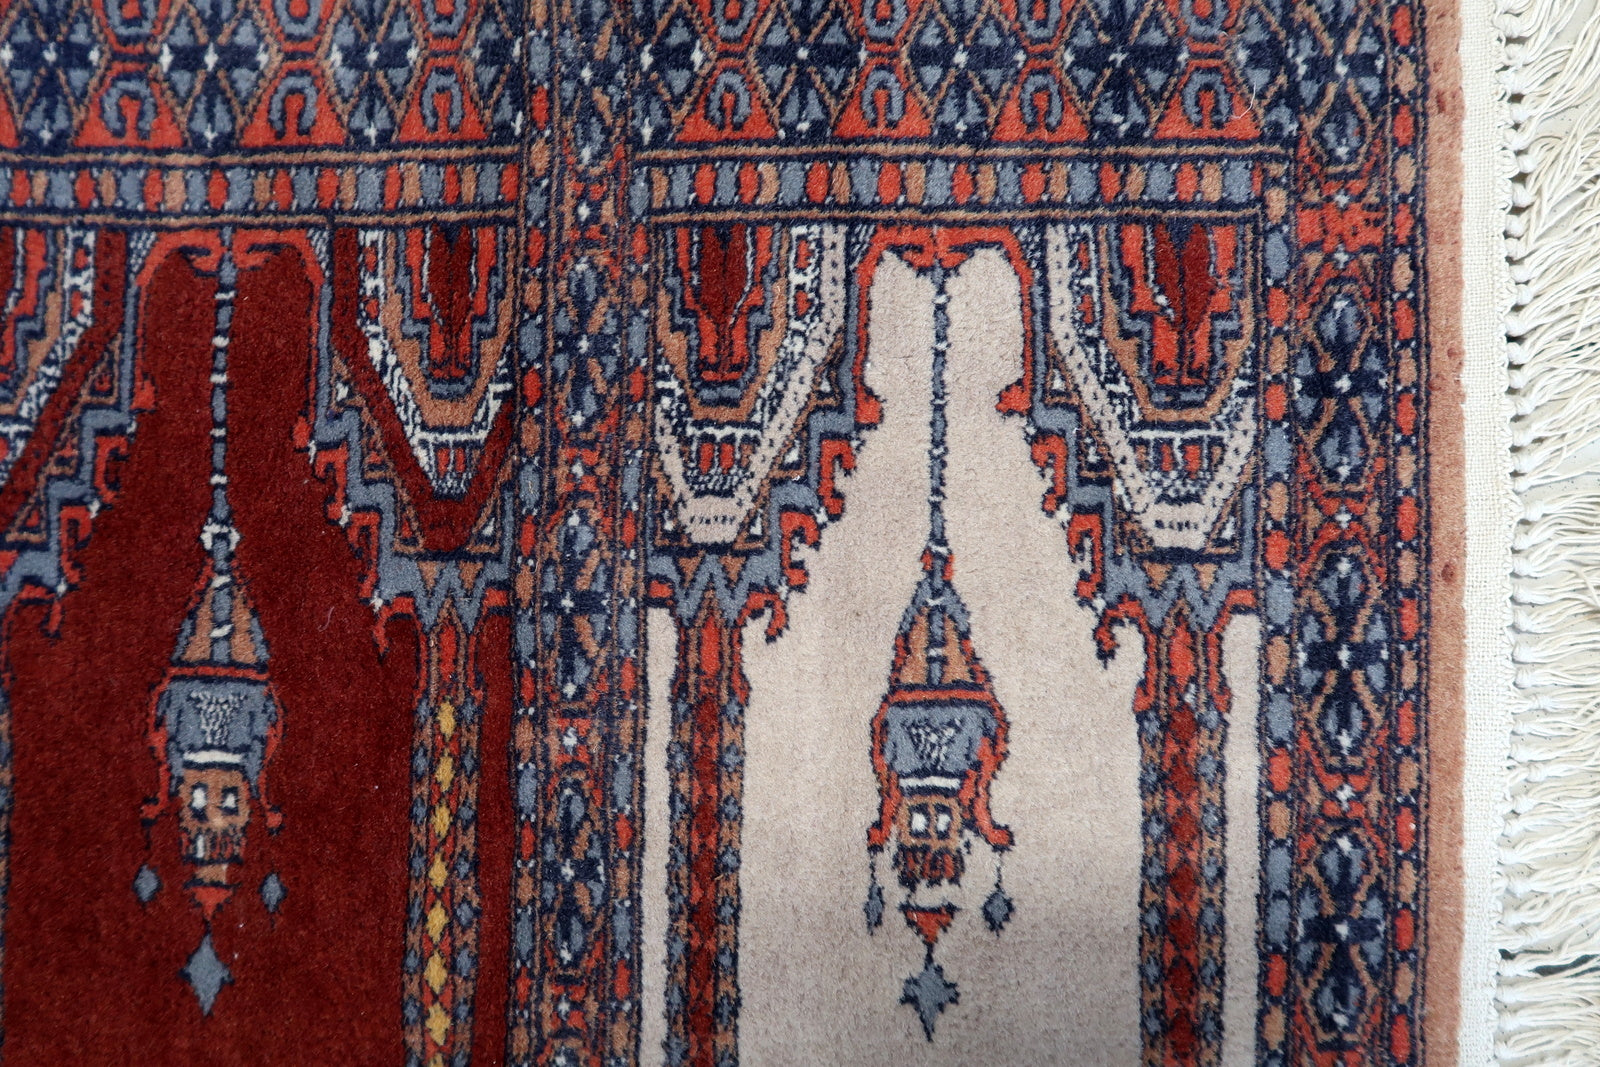 Overhead shot of the rug displaying its symmetrical patterns and faded colors